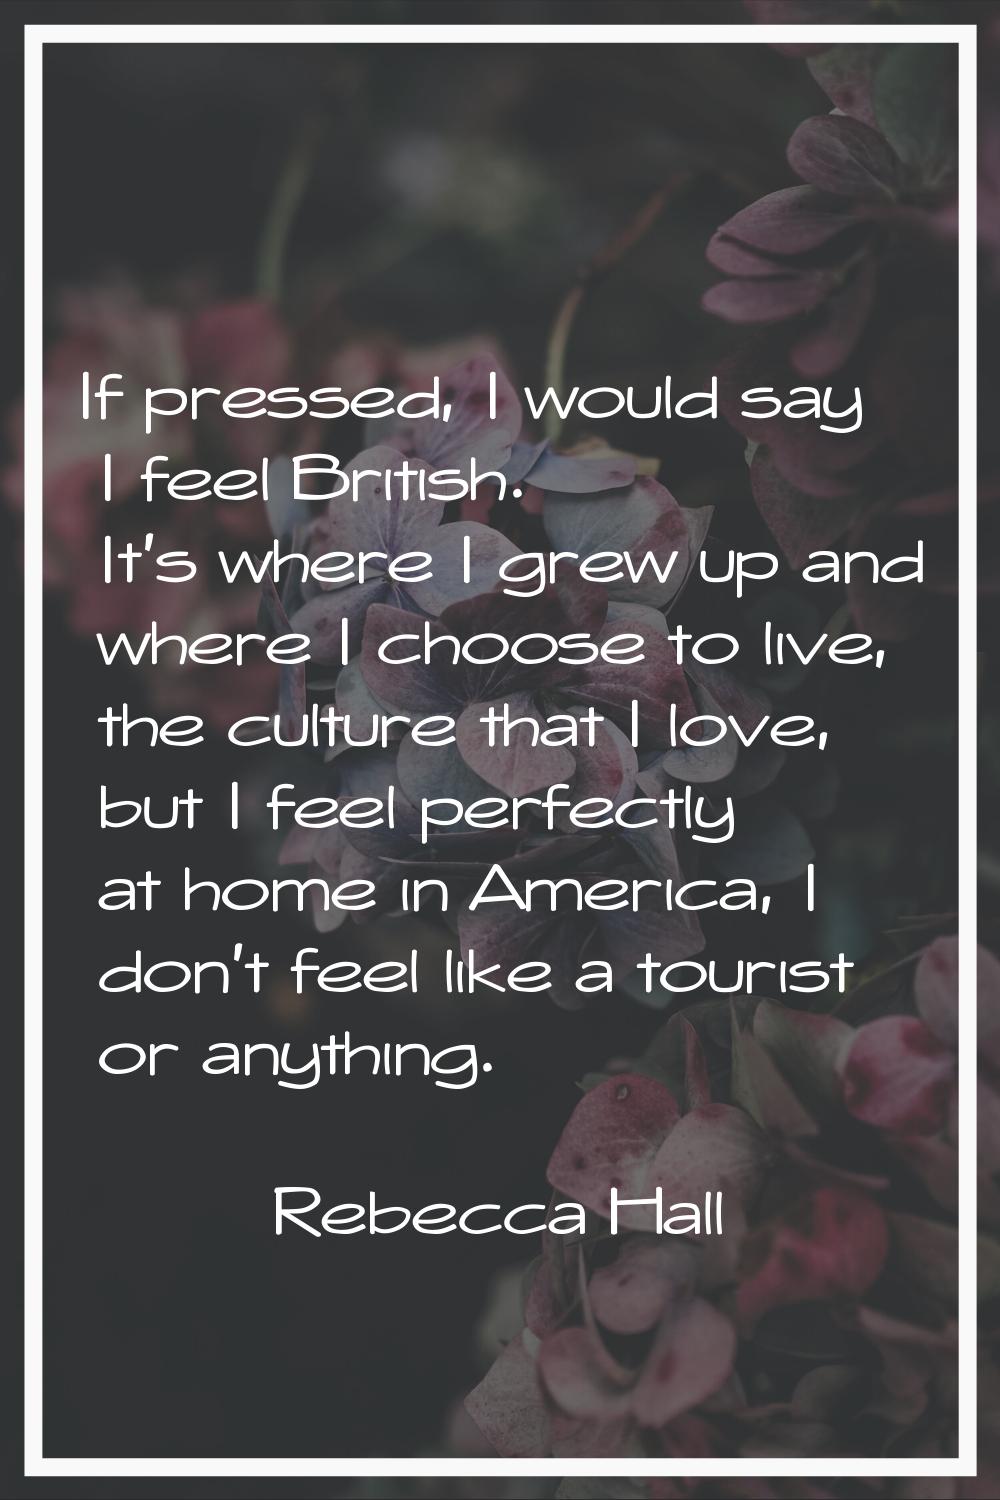 If pressed, I would say I feel British. It's where I grew up and where I choose to live, the cultur